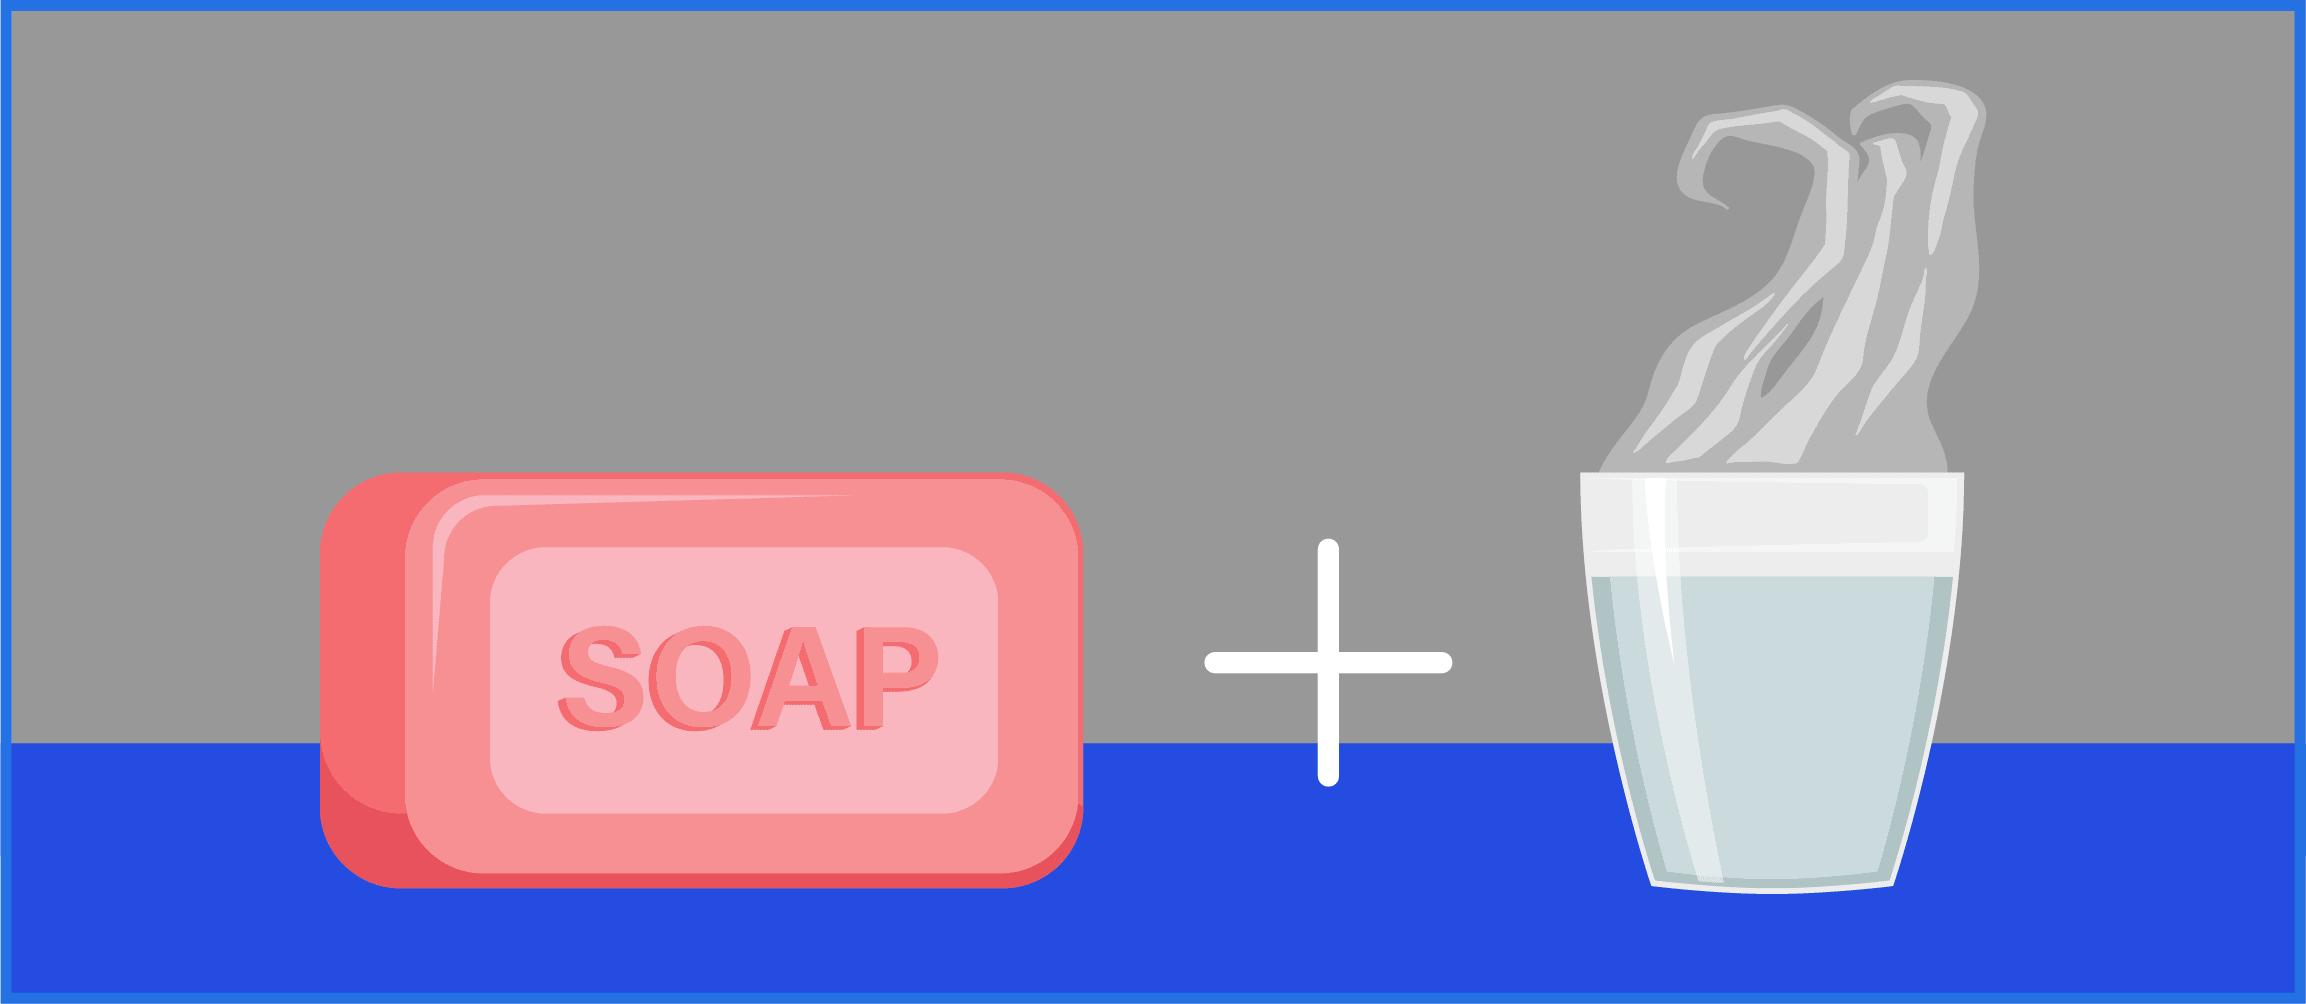 How to Get Sap Off Windshield in 3 Simple Steps